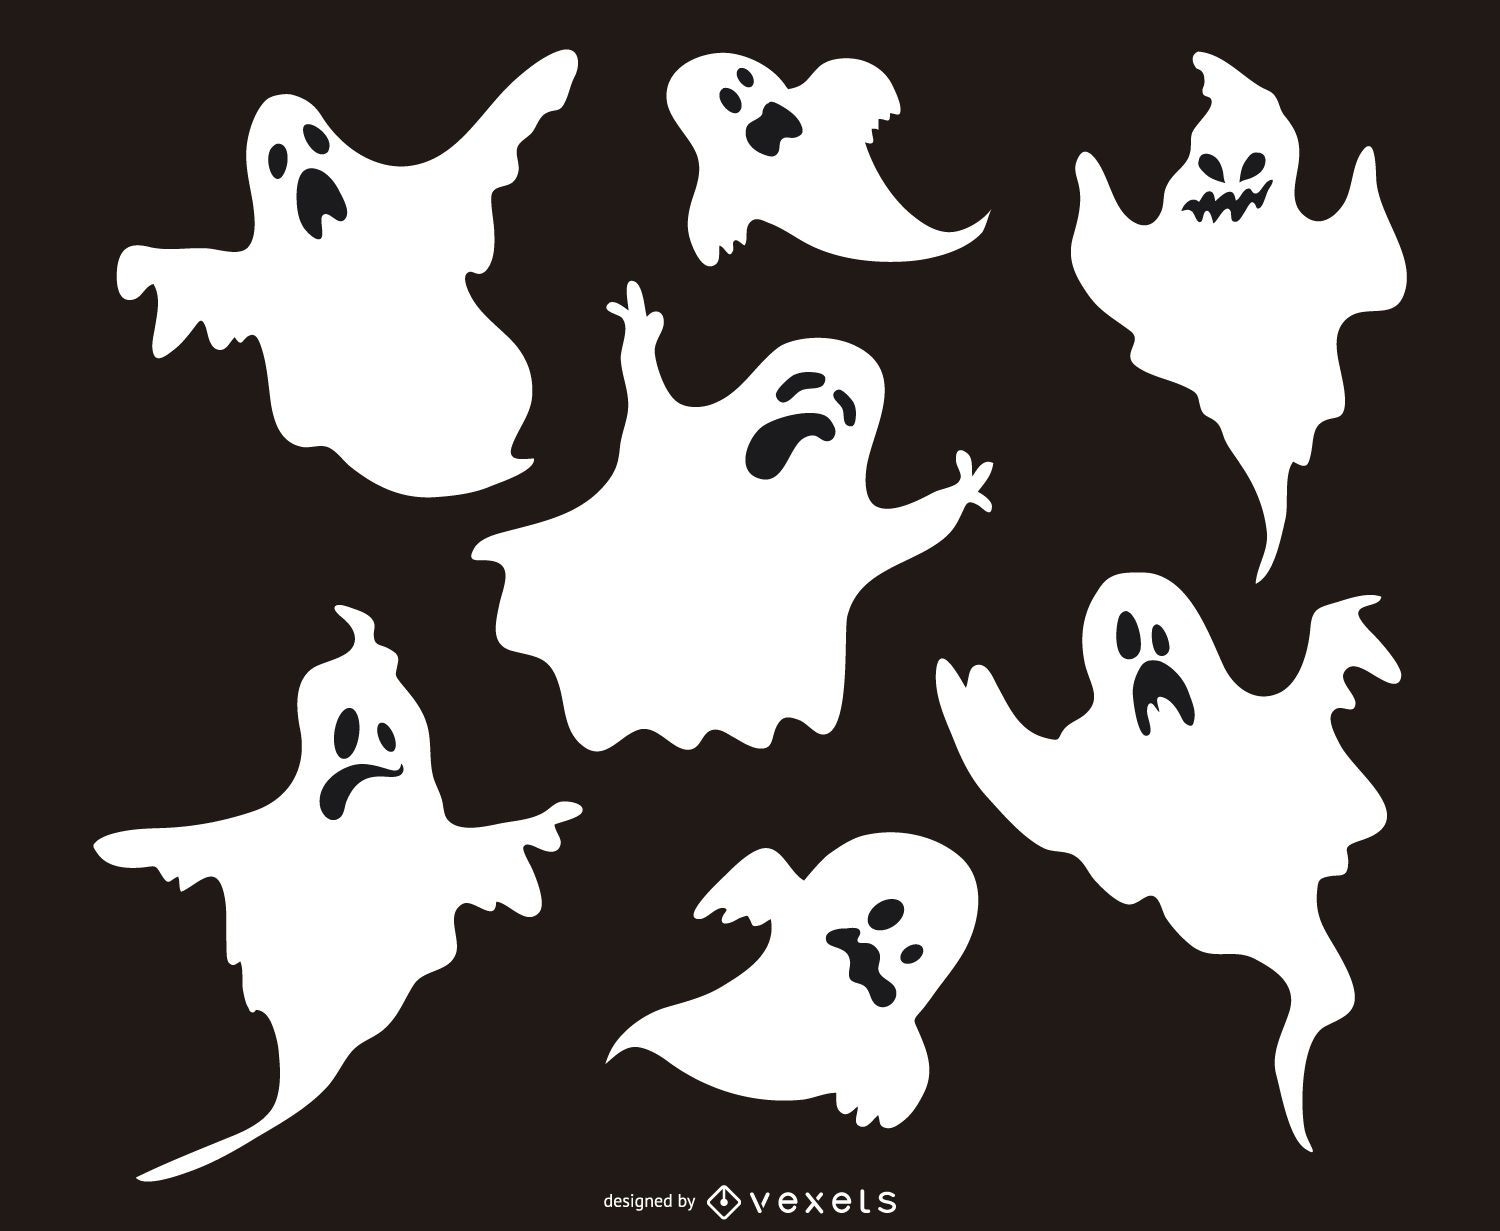 7 ghost silhouettes set